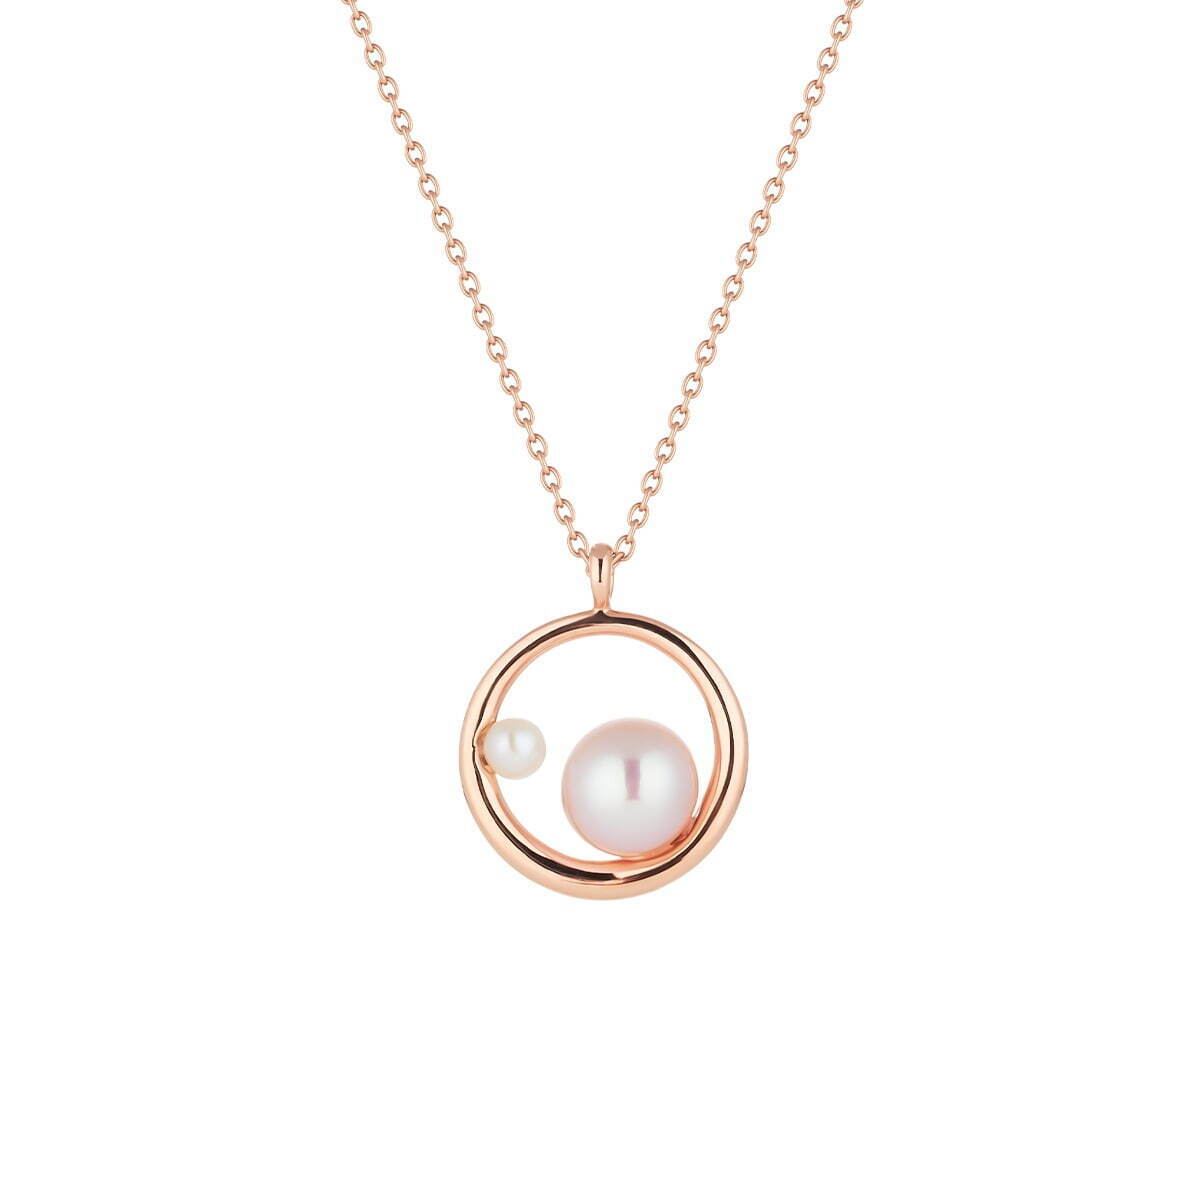 SV950(PGc) Necklace / Pearl 19,800円